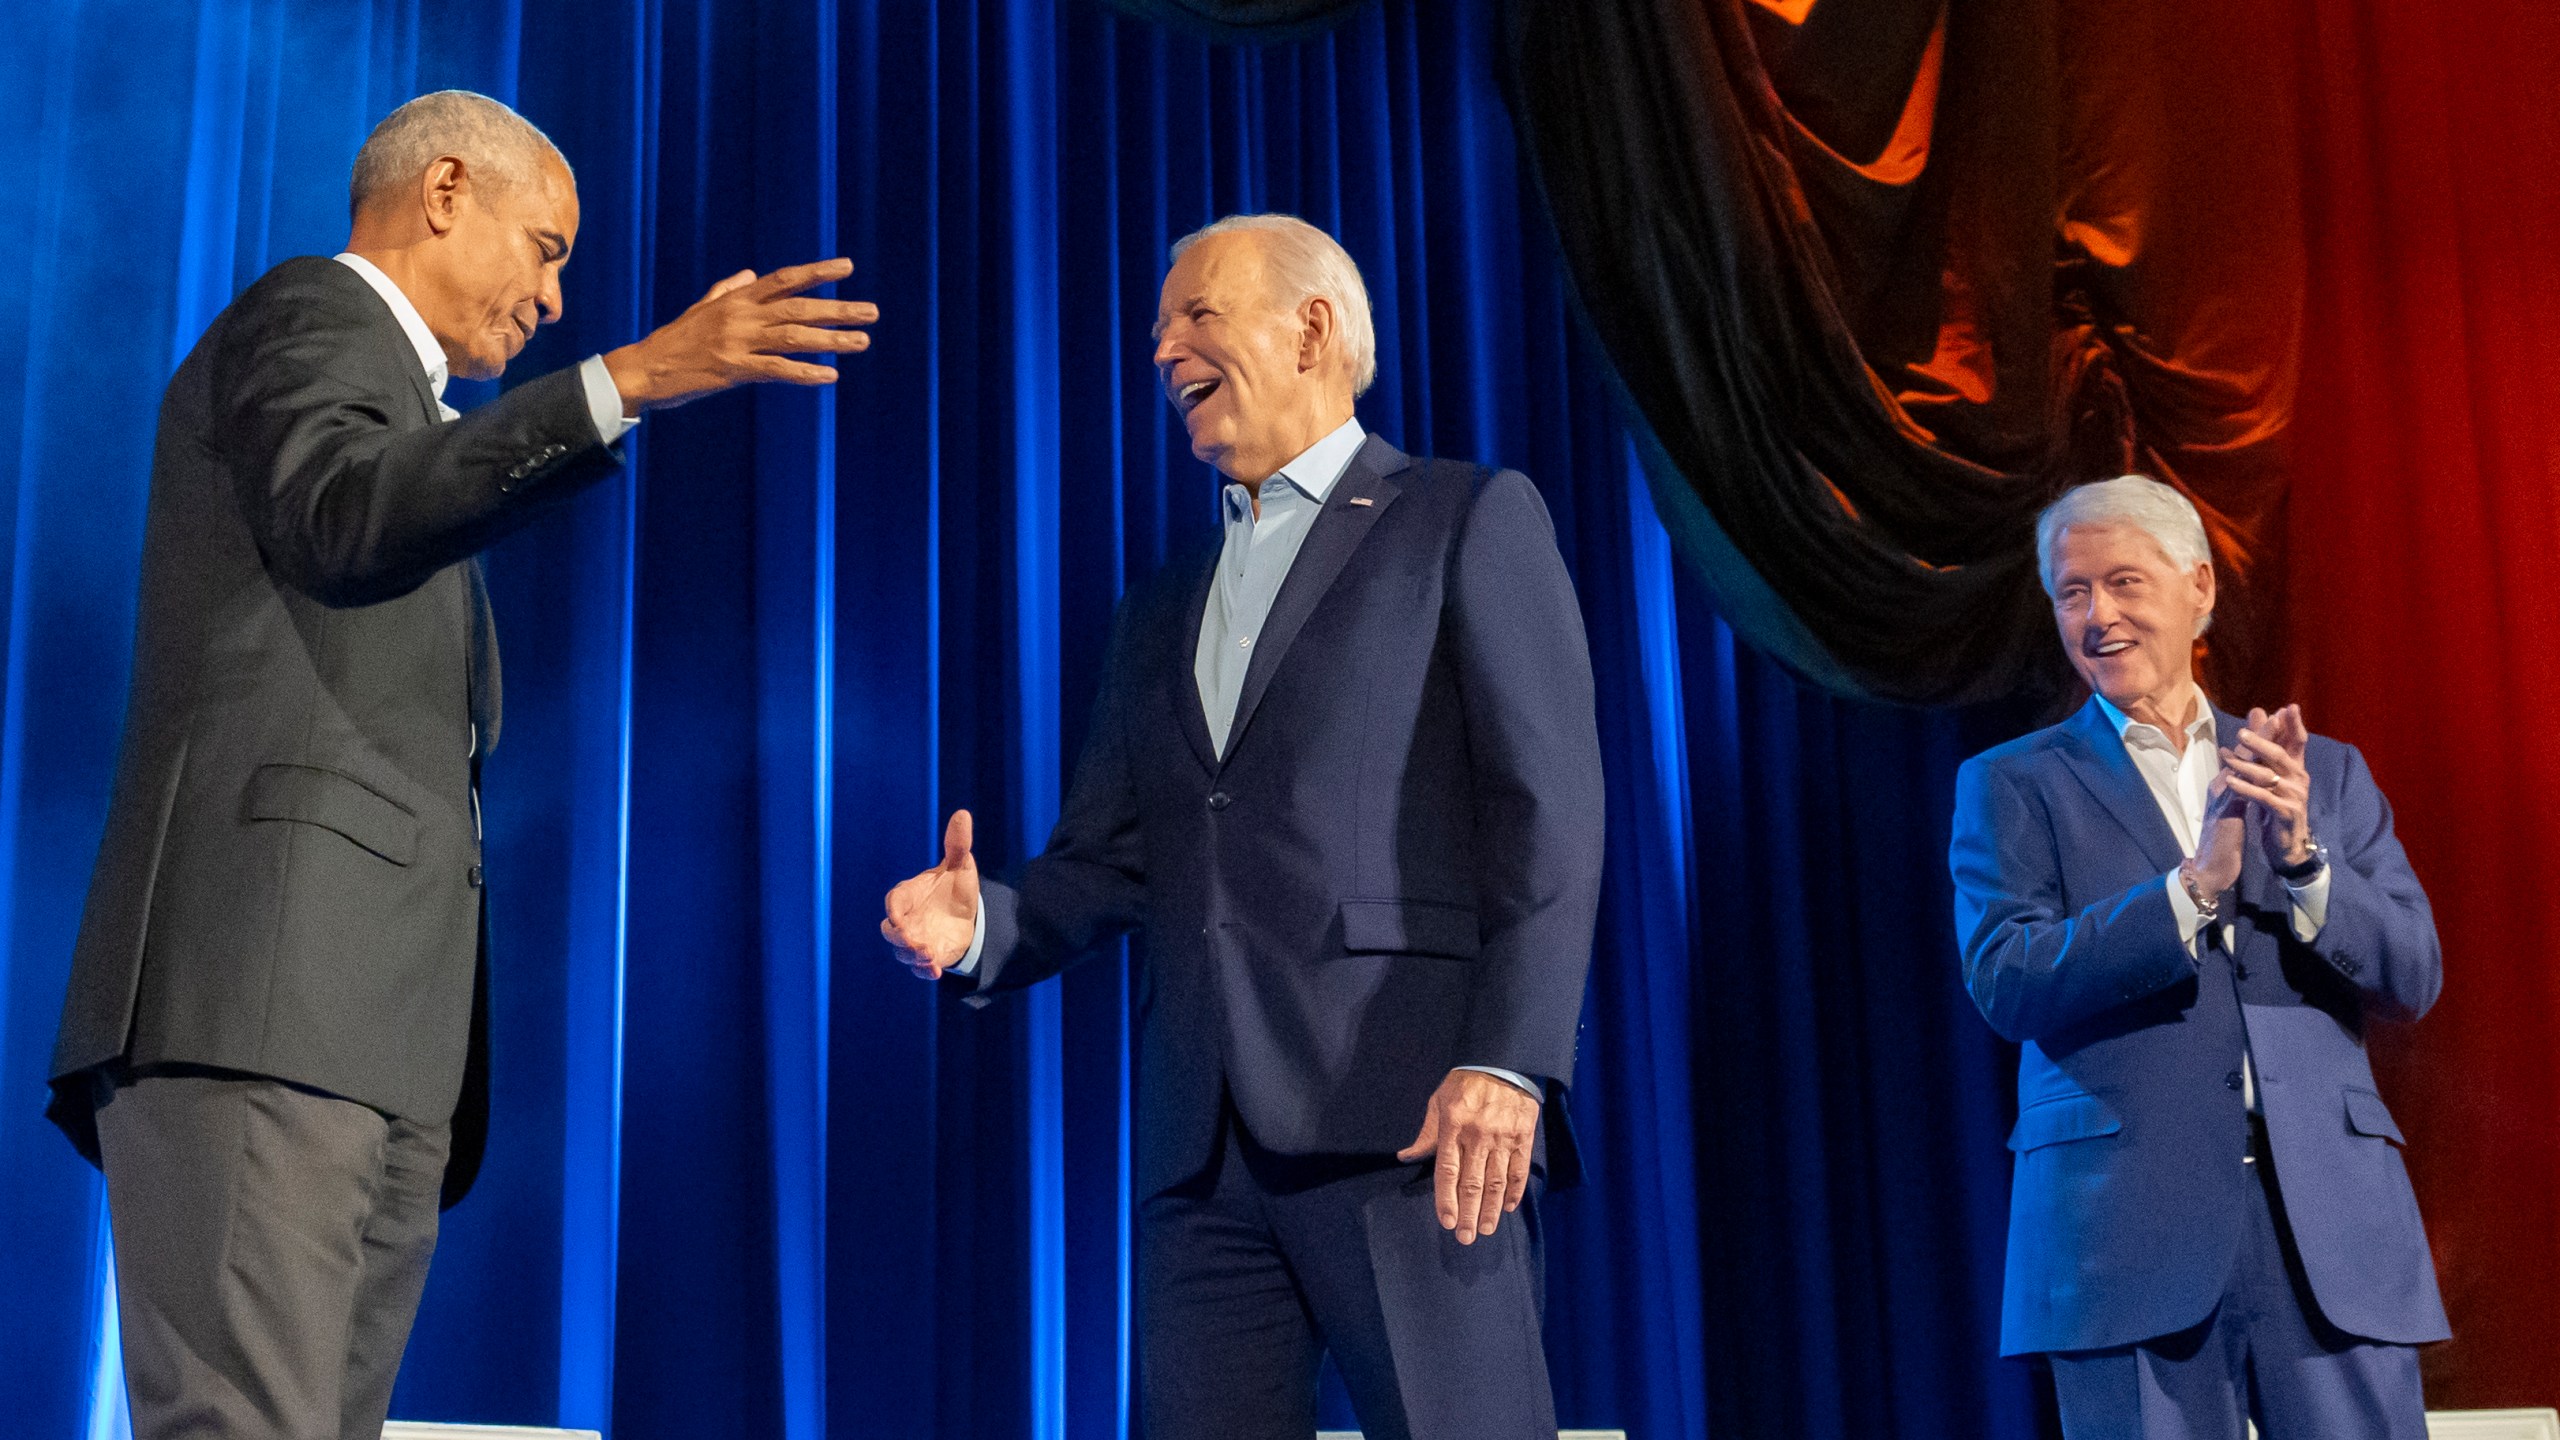 President Joe Biden, center, and former presidents Barack Obama and Bill Clinton participate in a fundraising event with Stephen Colbert at Radio City Music Hall, Thursday, March 28, 2024, in New York. (AP Photo/Alex Brandon)